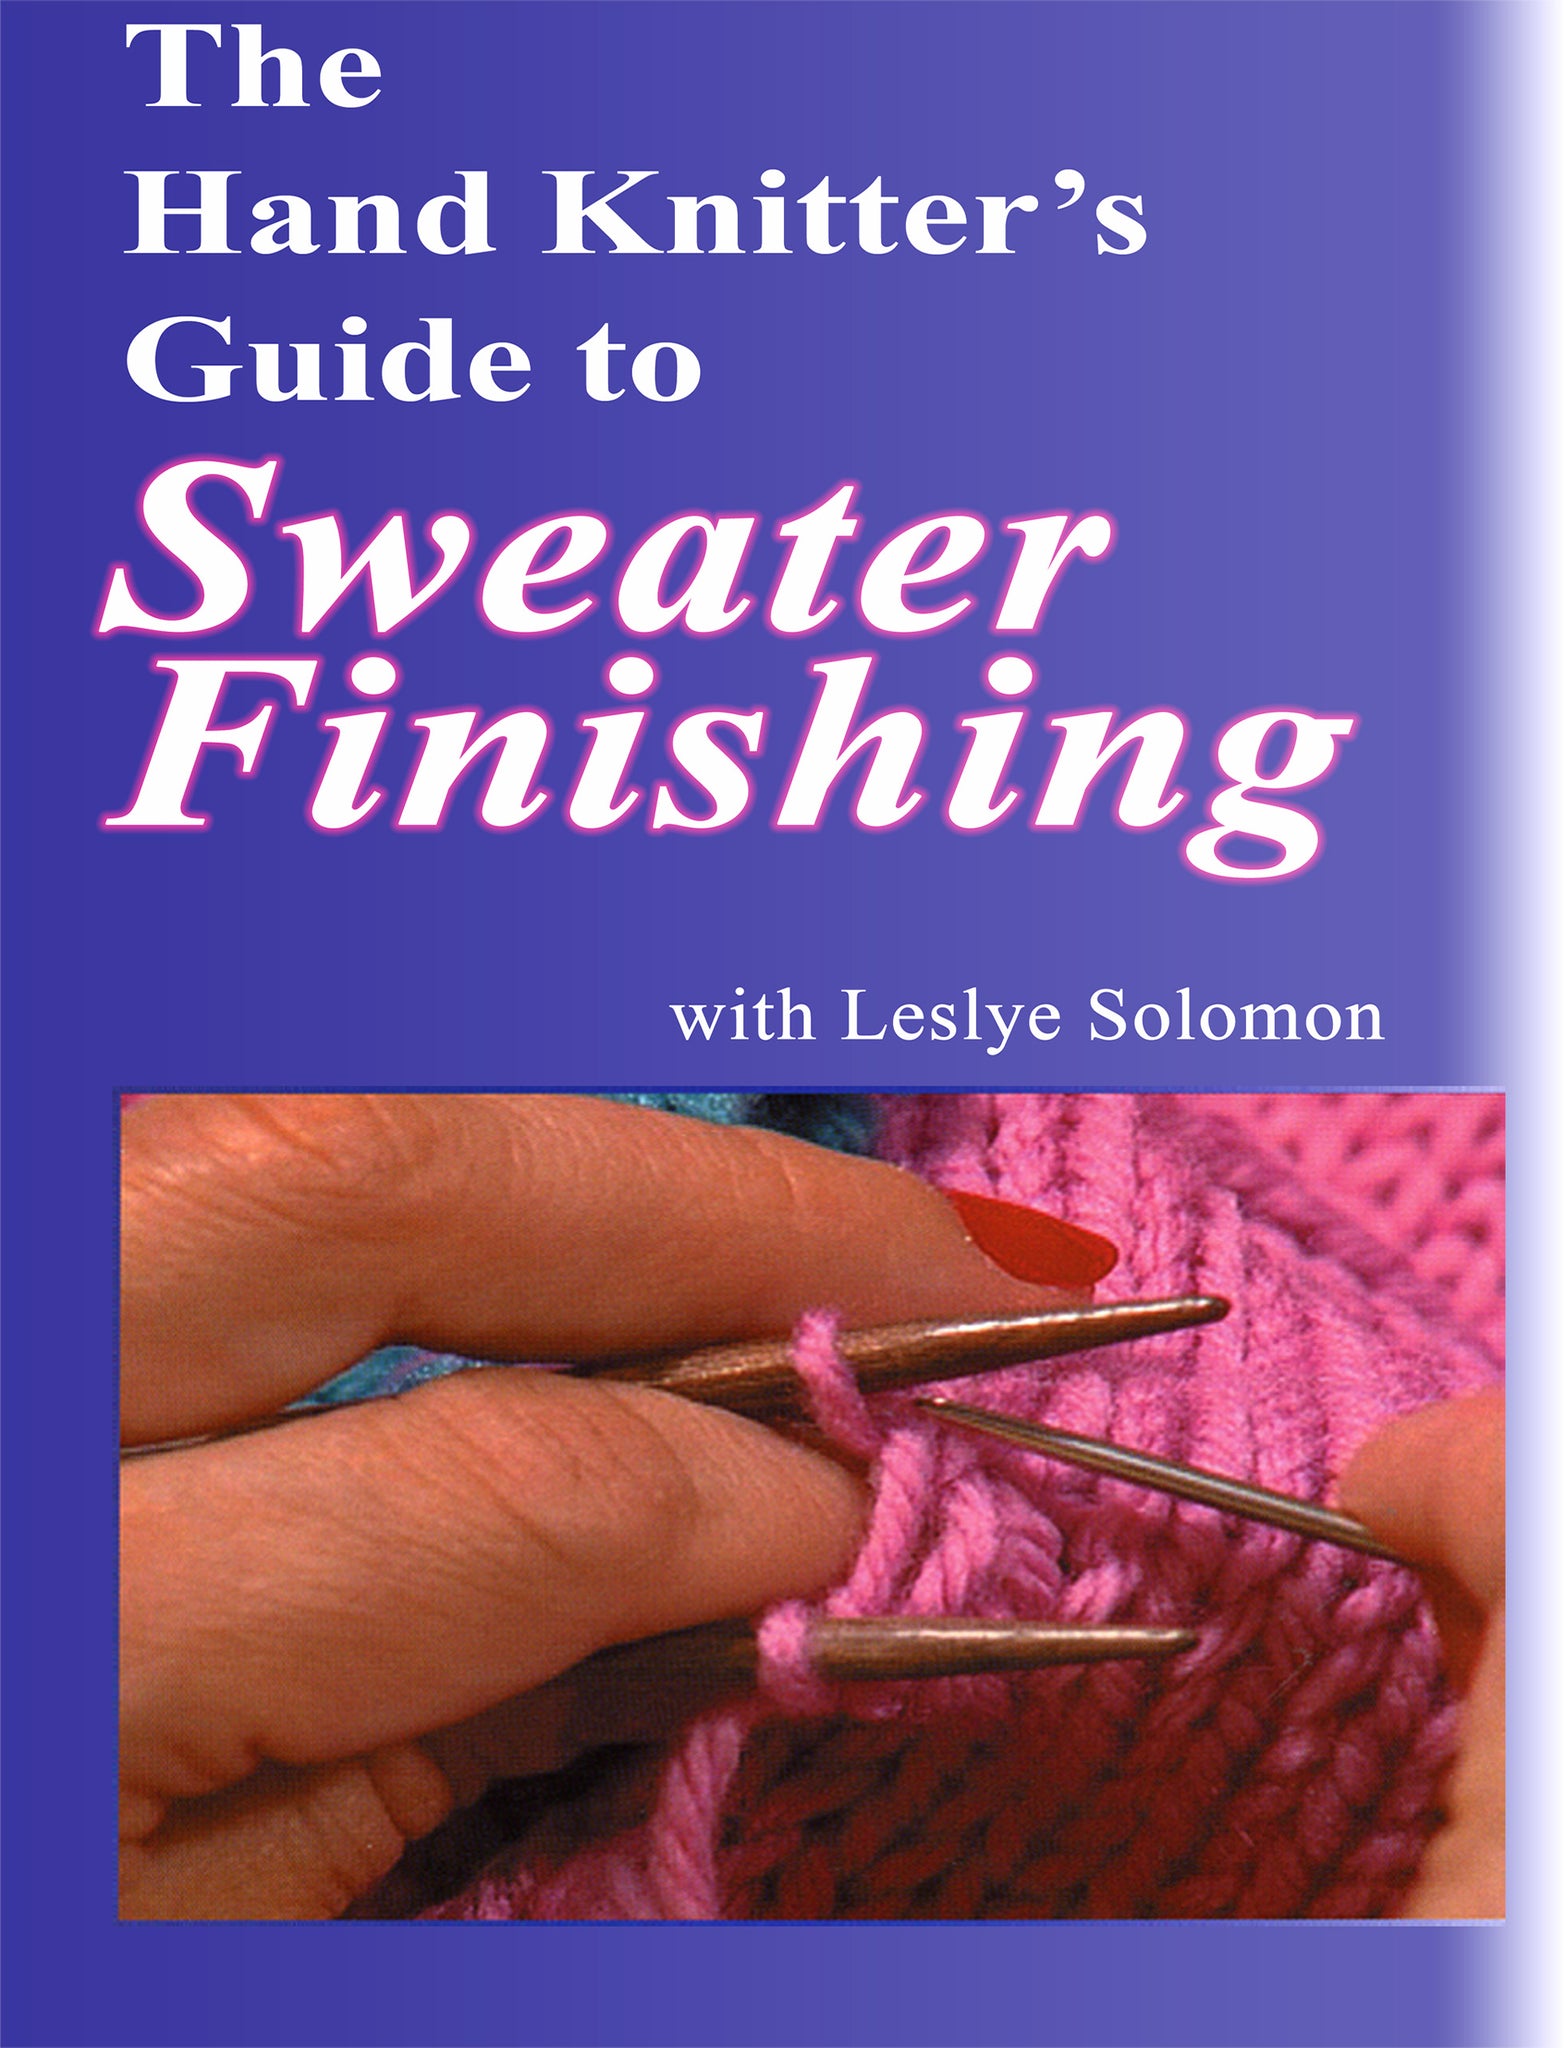 The Hand Knitter's Guide to Sweater Finishing with Leslye Solomon- Digital Download